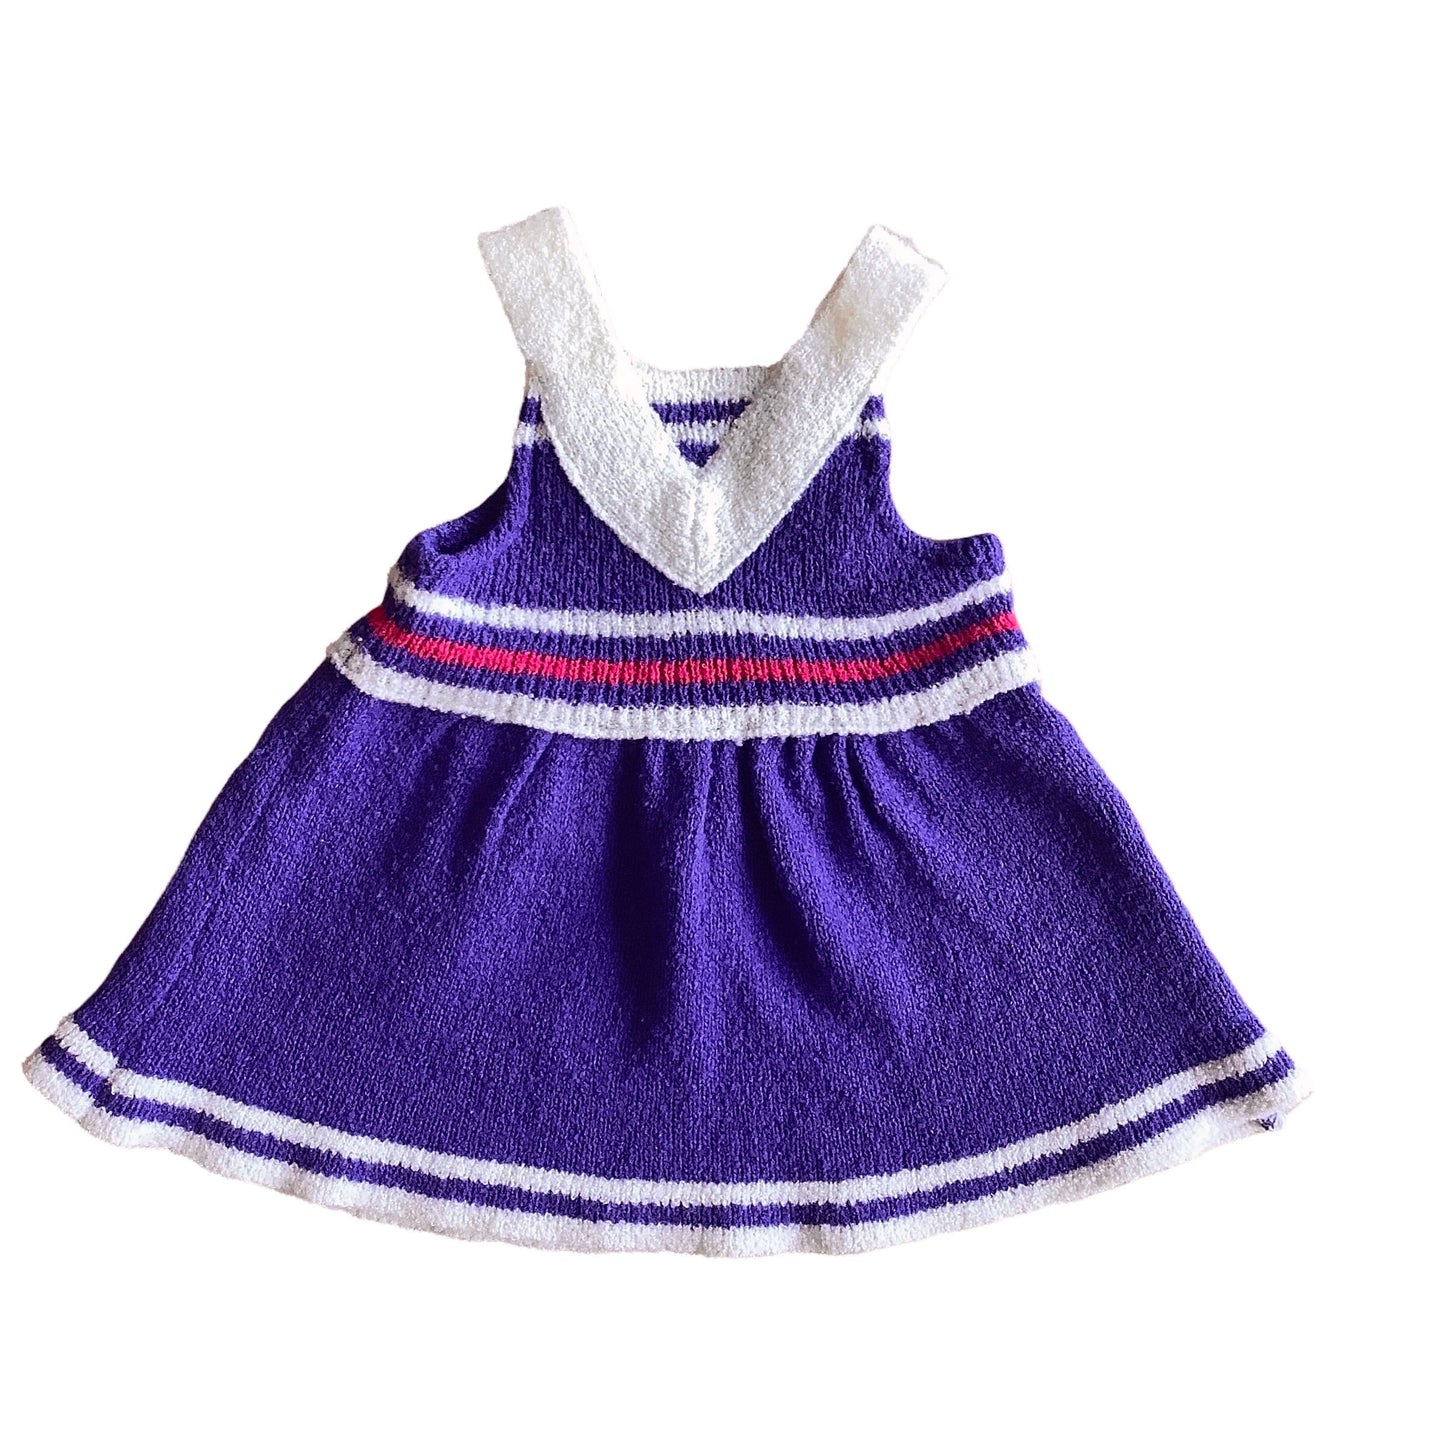 Vintage 1970s Purple Knitted Dress  / 0-3 Months